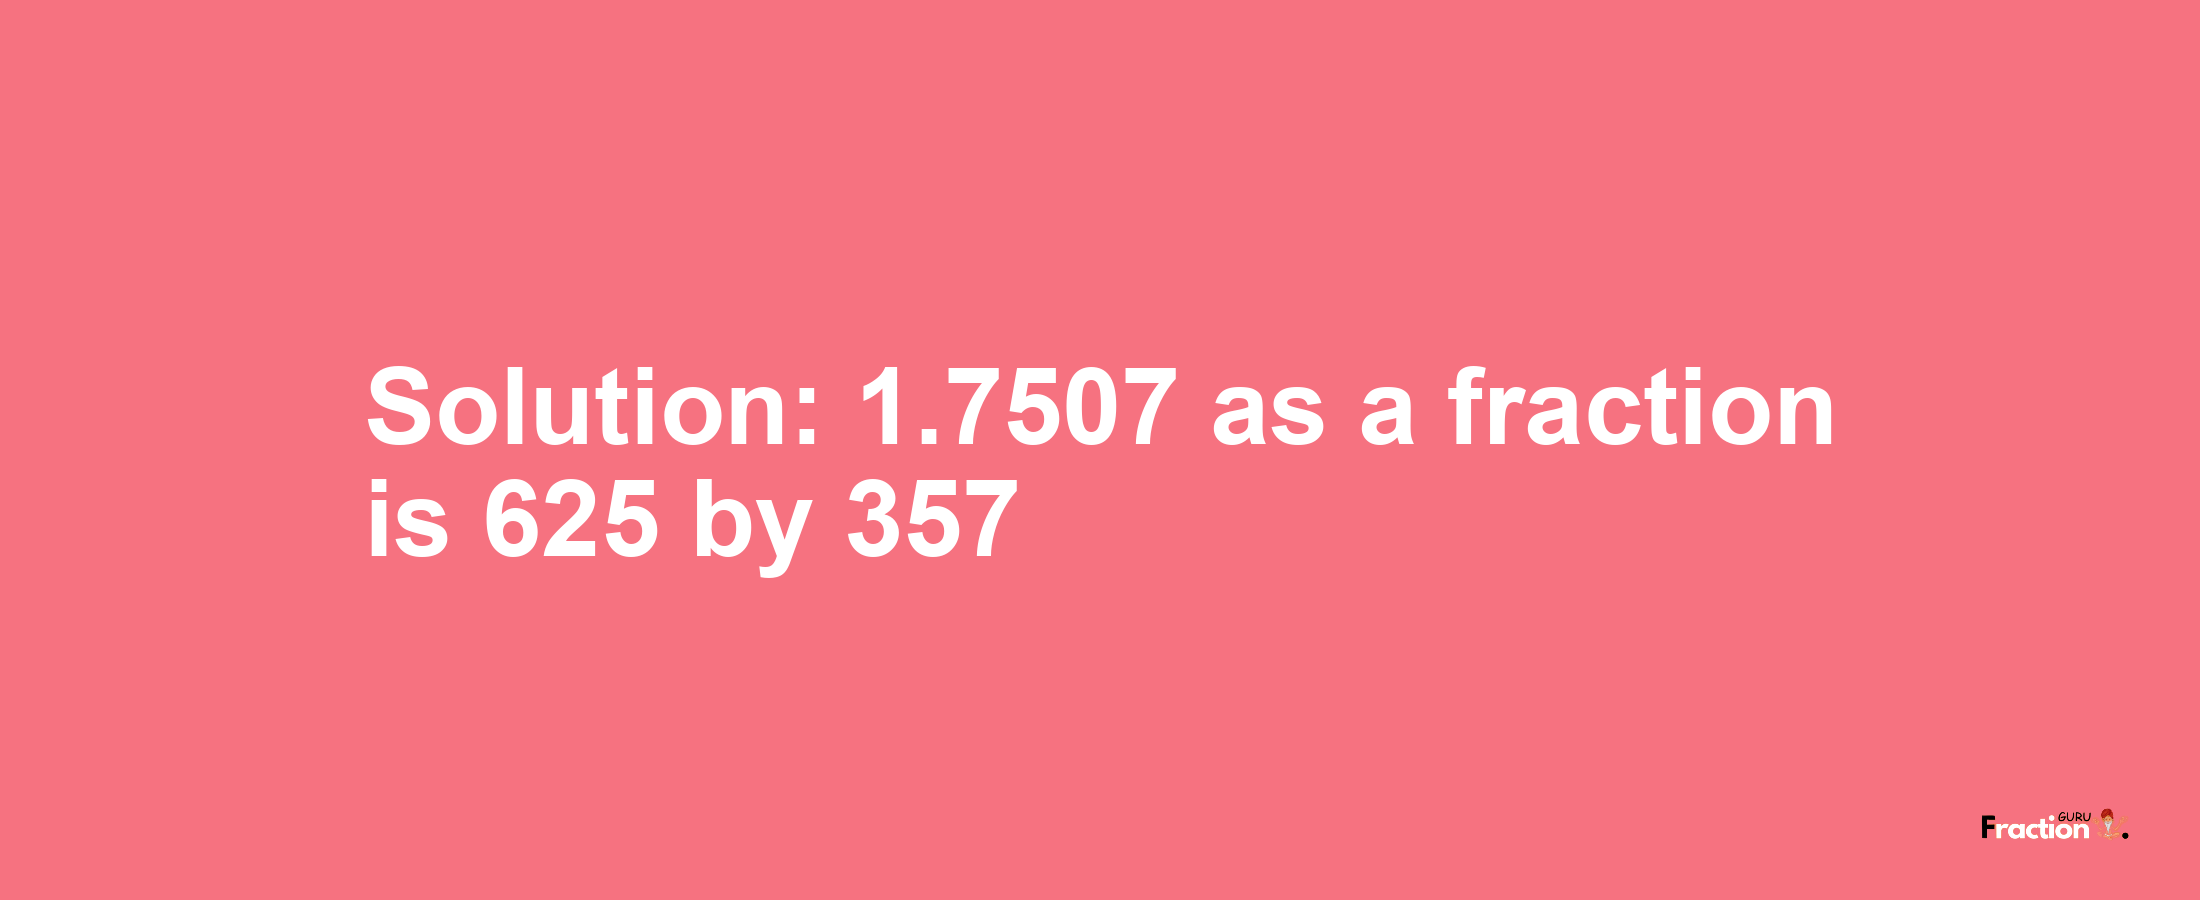 Solution:1.7507 as a fraction is 625/357